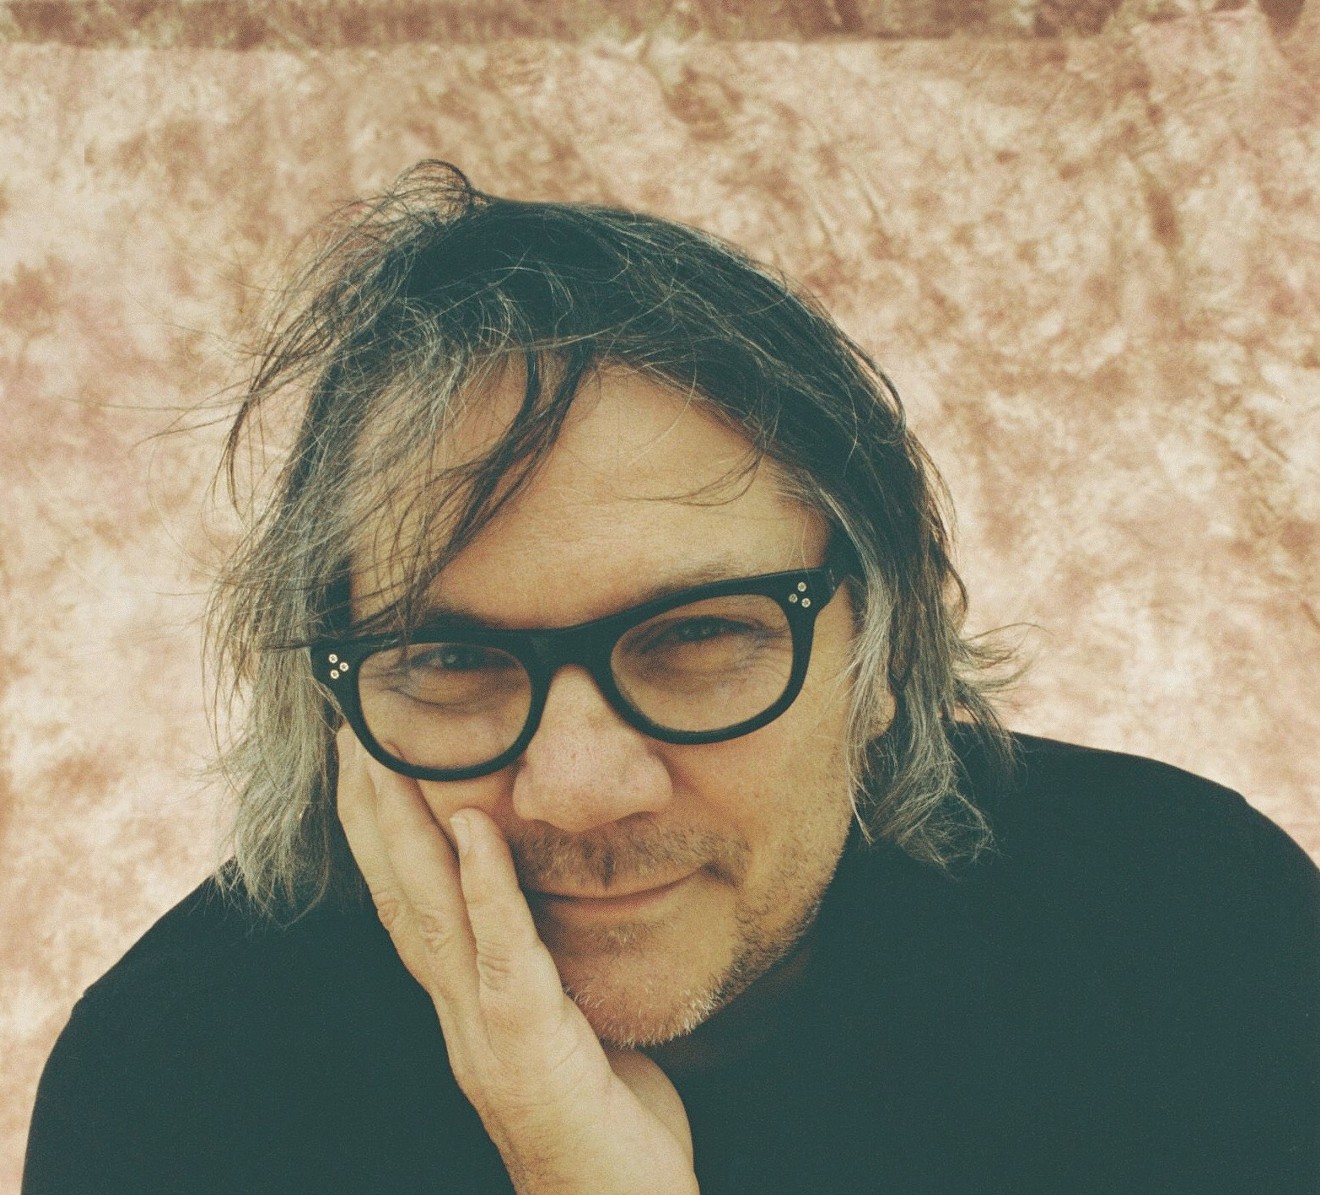 Jeff Tweedy's spent 20 years in Wilco, and had a whole musical life before that.